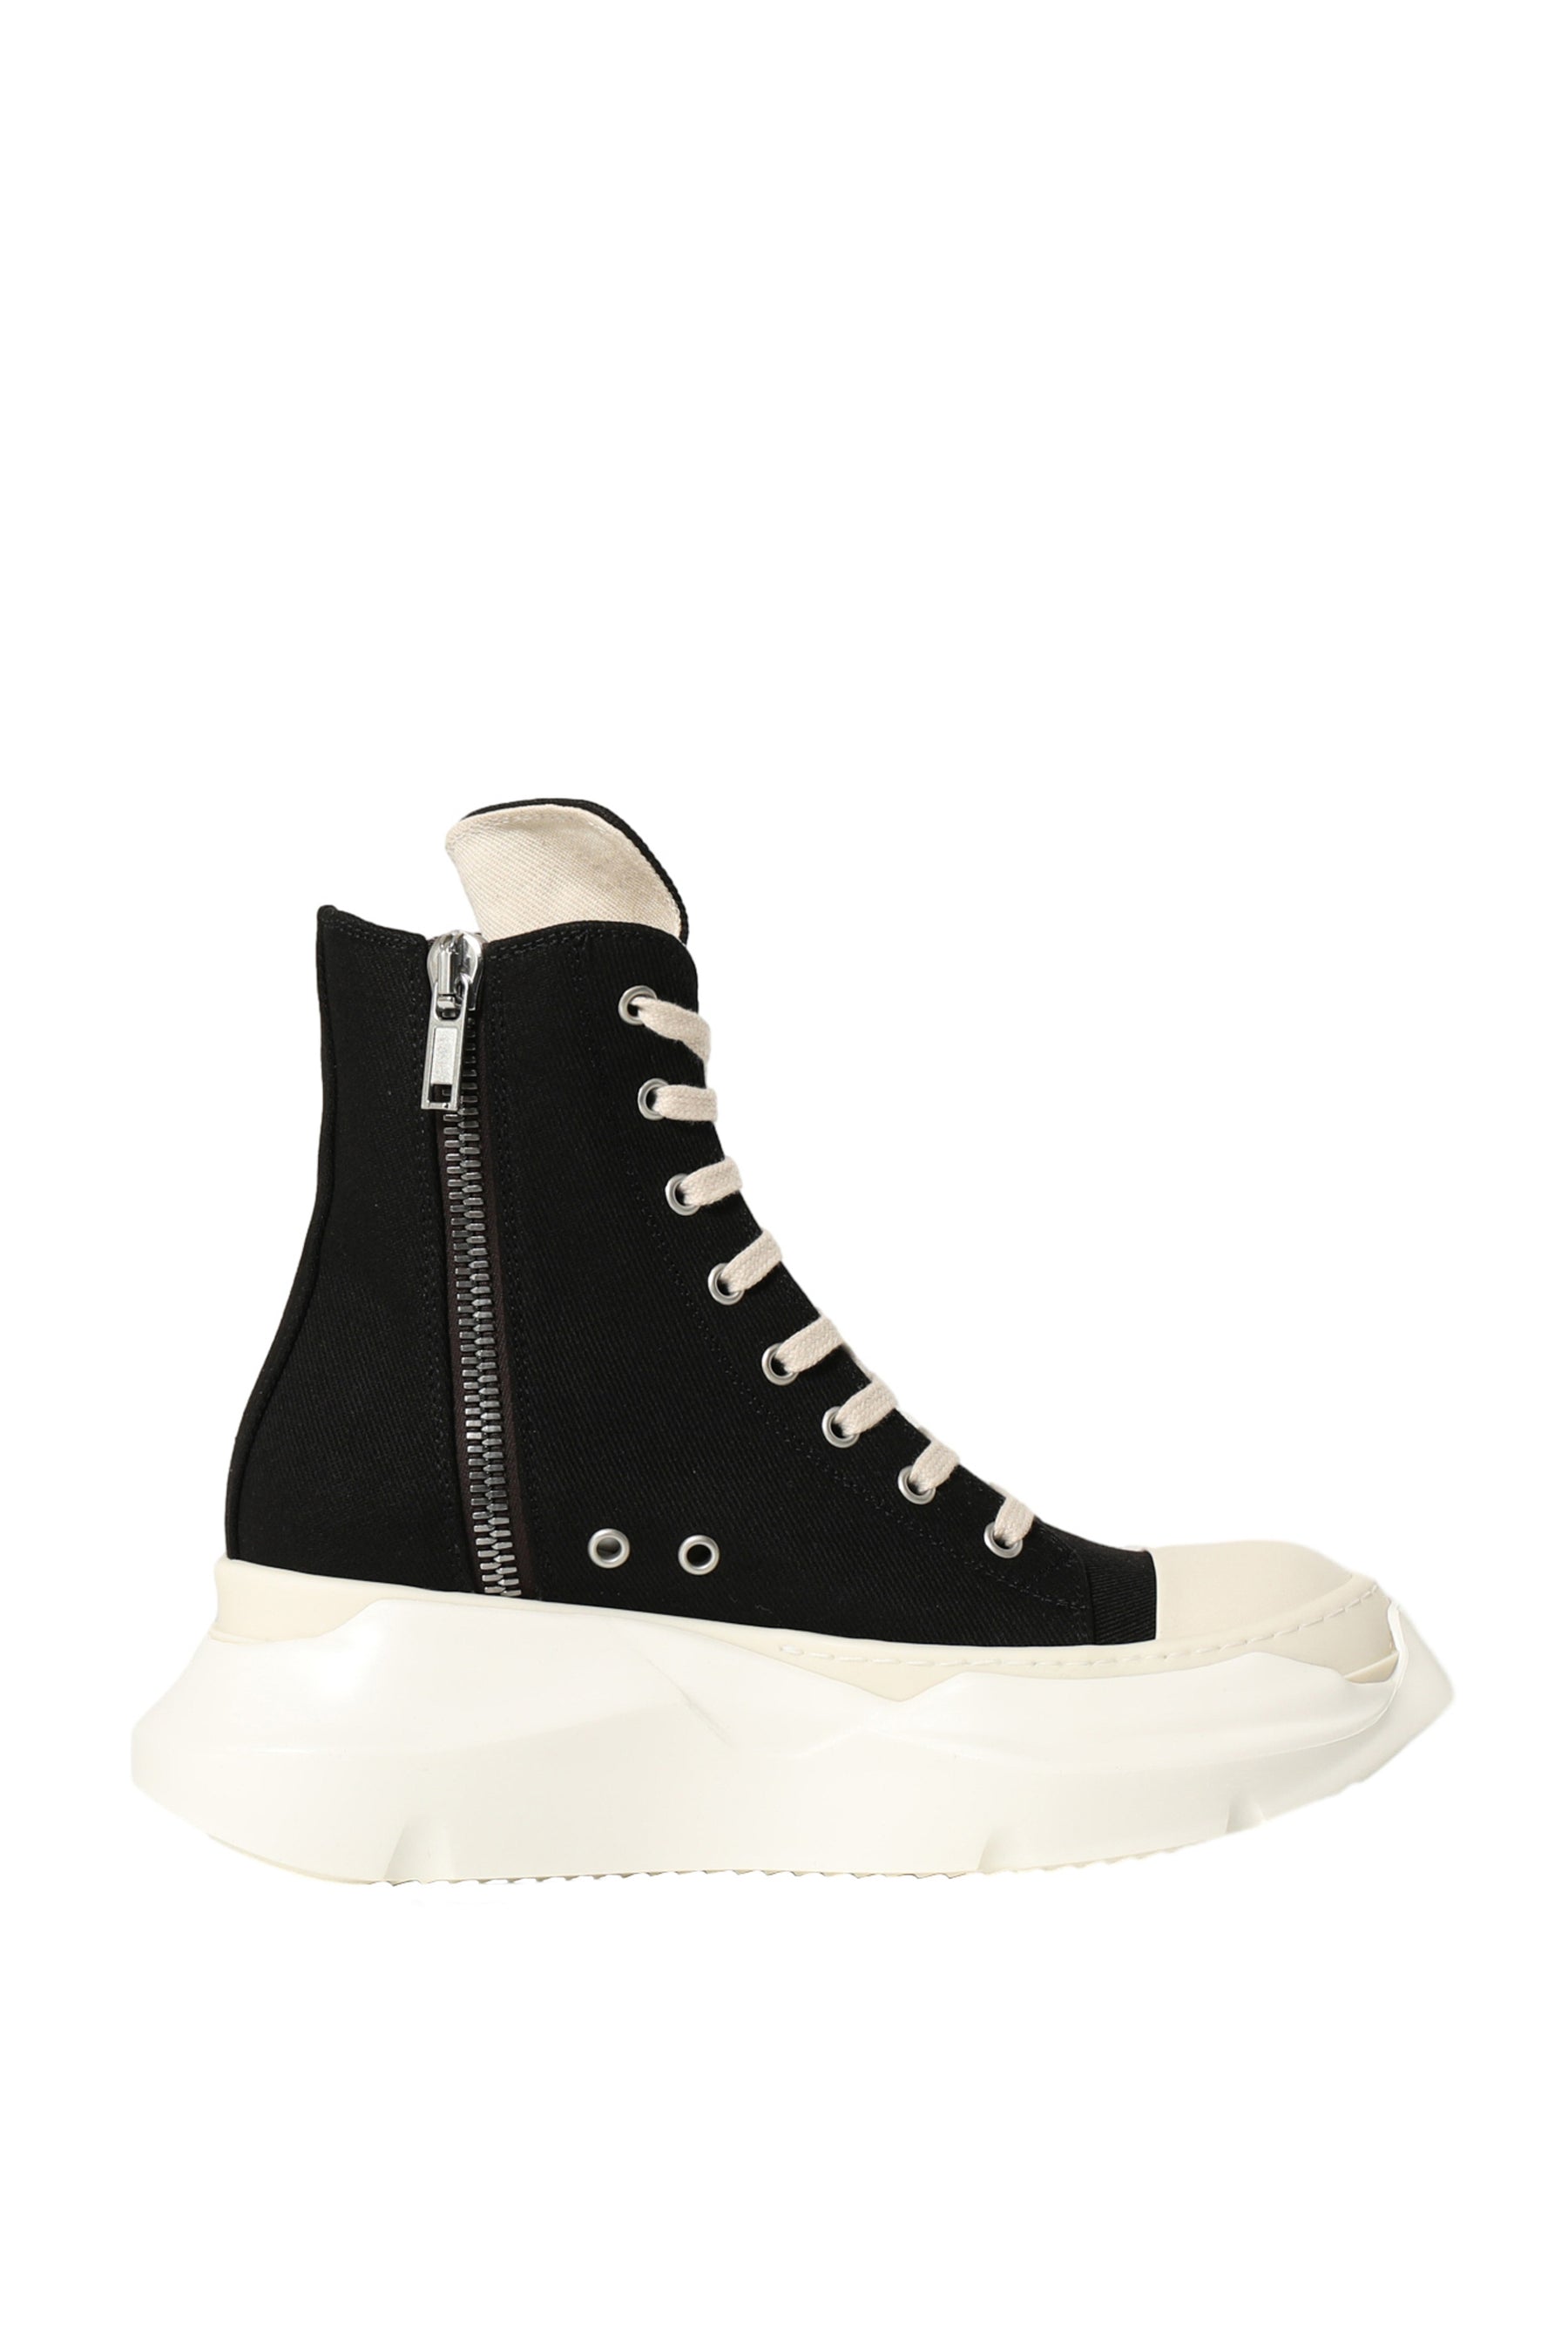 Rick Owens DRKSHDW distressed-effect lace-up high-top Sneakers - Farfetch